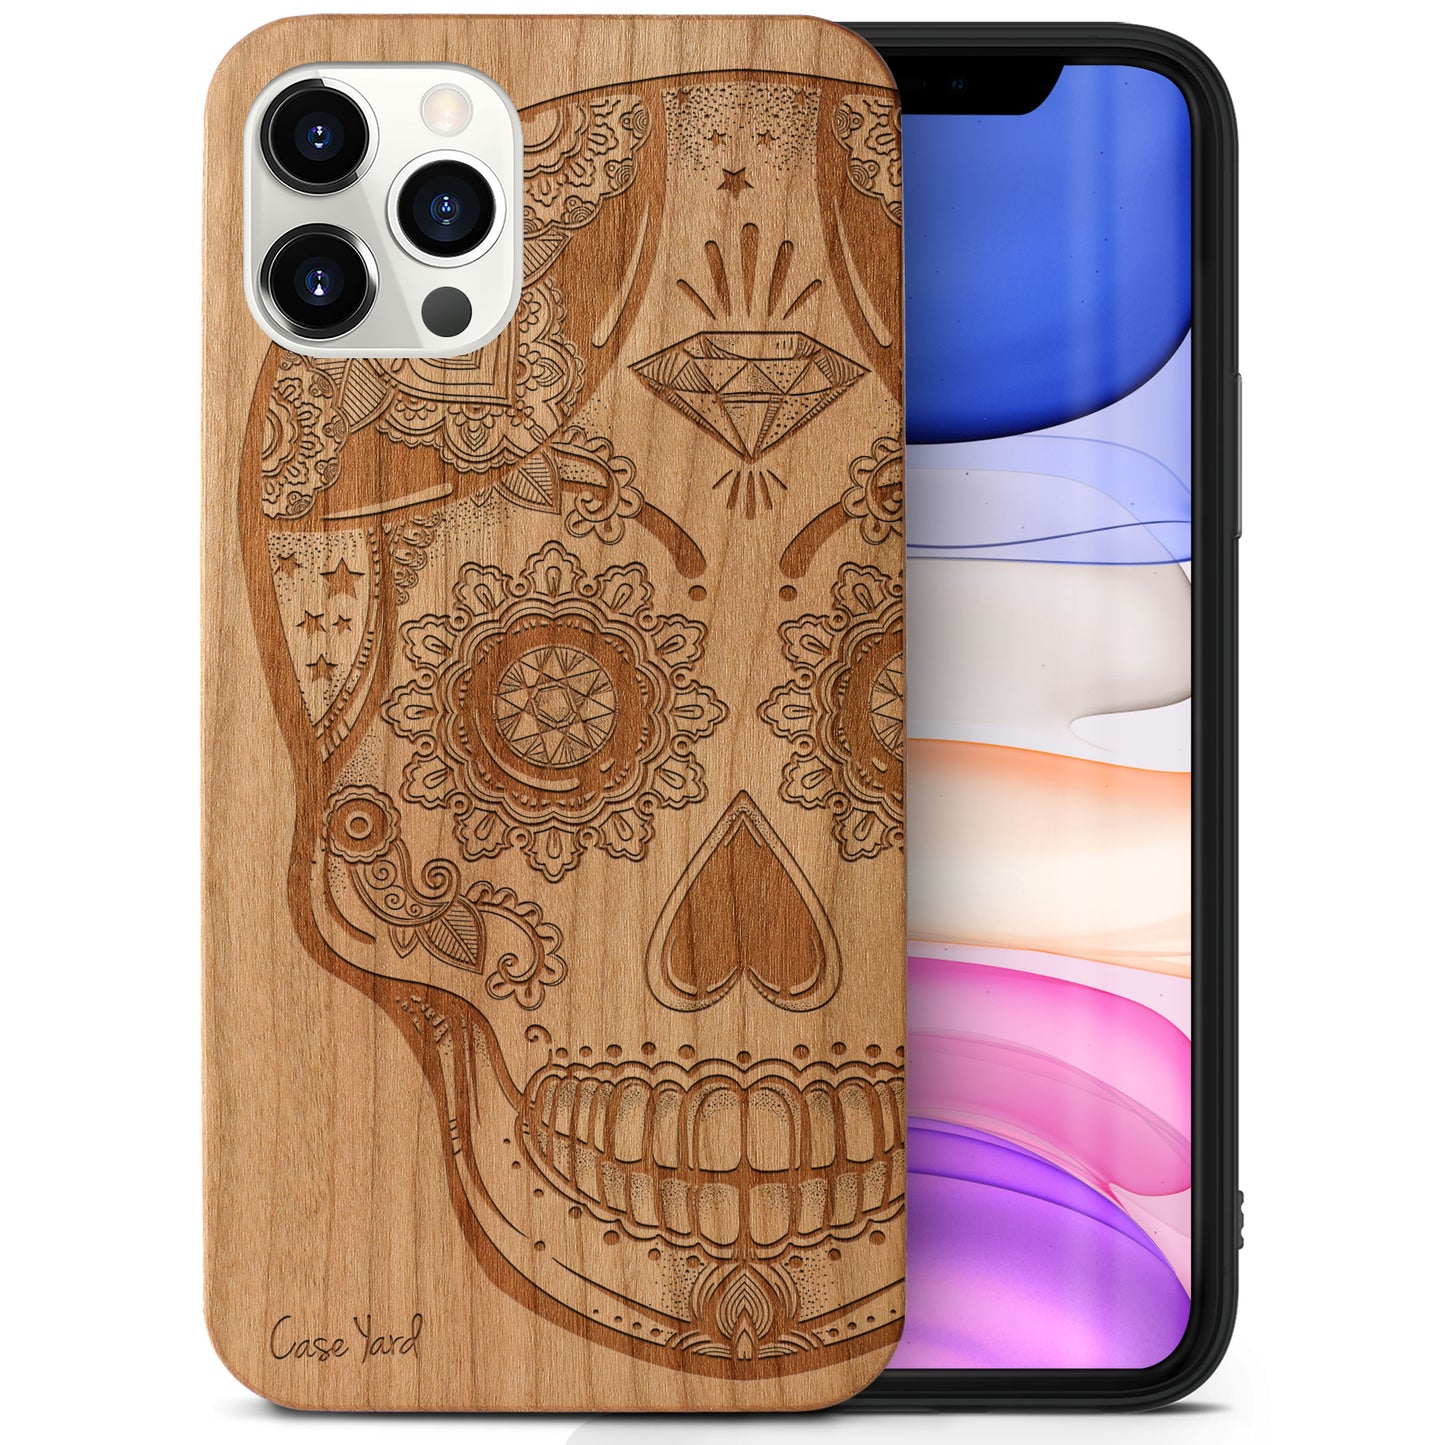 Wooden Cell Phone Case Cover, Laser Engraved case for iPhone & Samsung phone Ice Skull Design